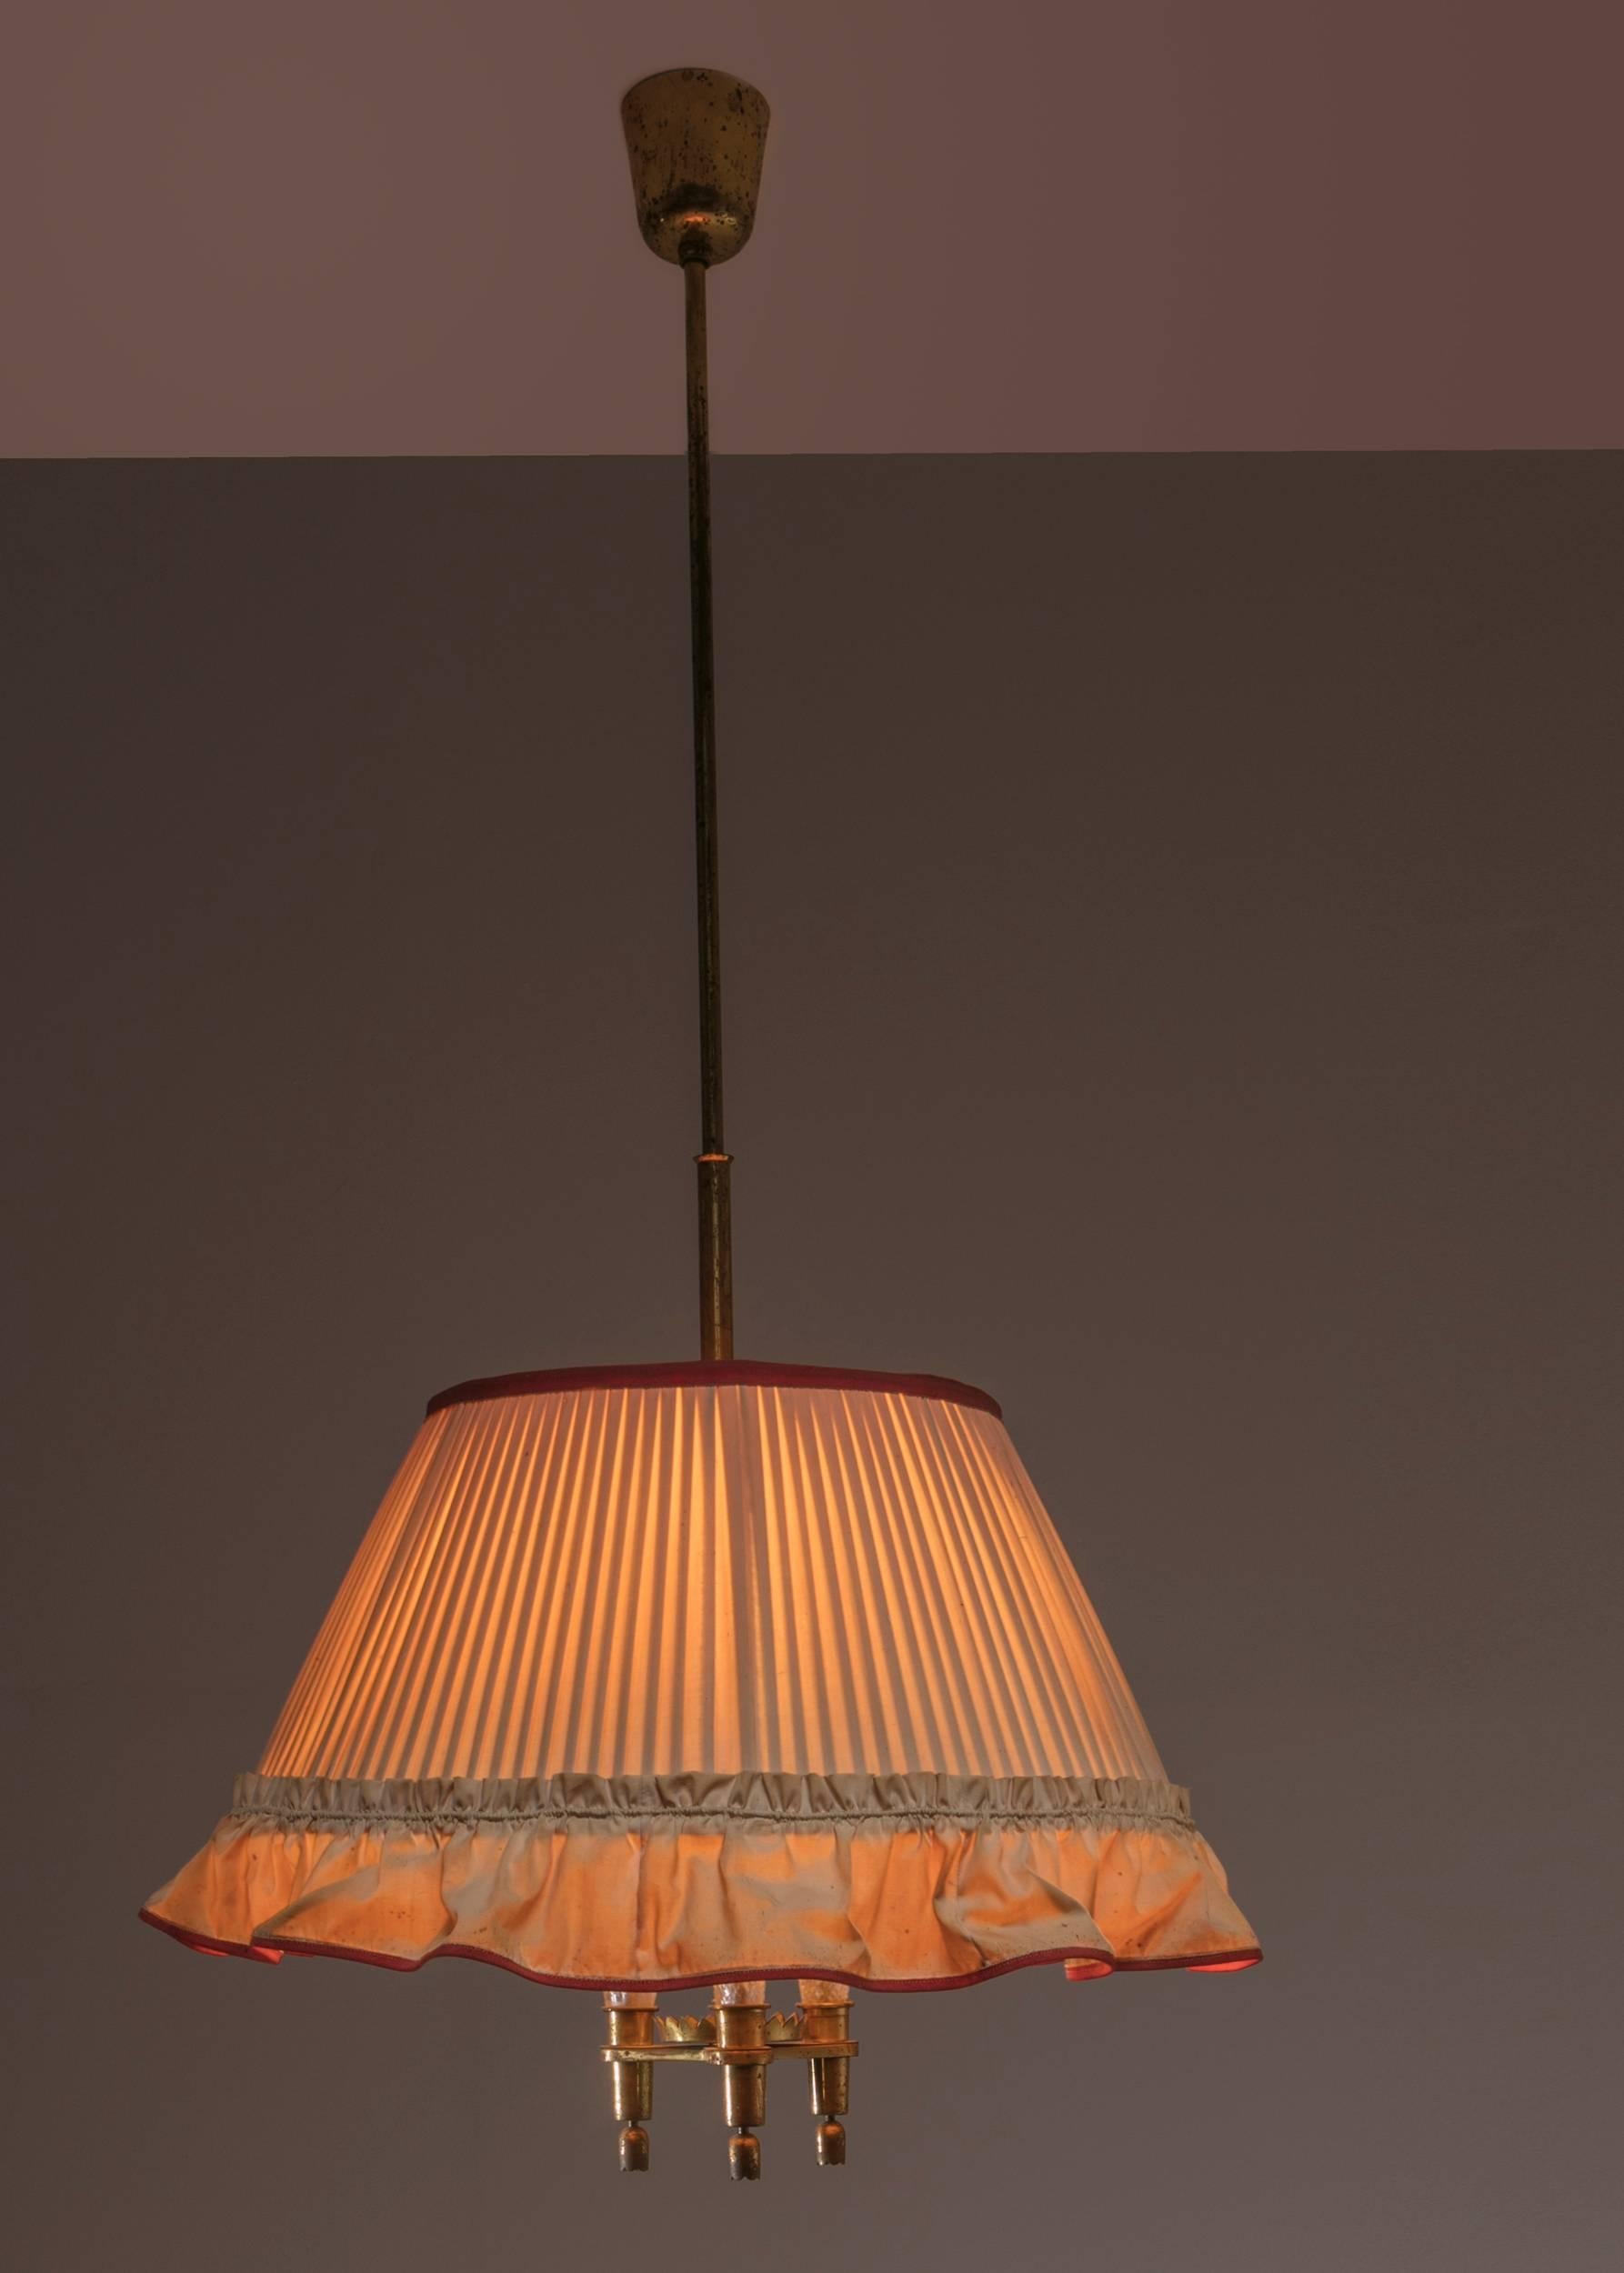 Italian 1940s pendant lamp manufactured by Strada, Milano.
The fabric shade hides three beautifully detailed light elements with brass and crystal elements.